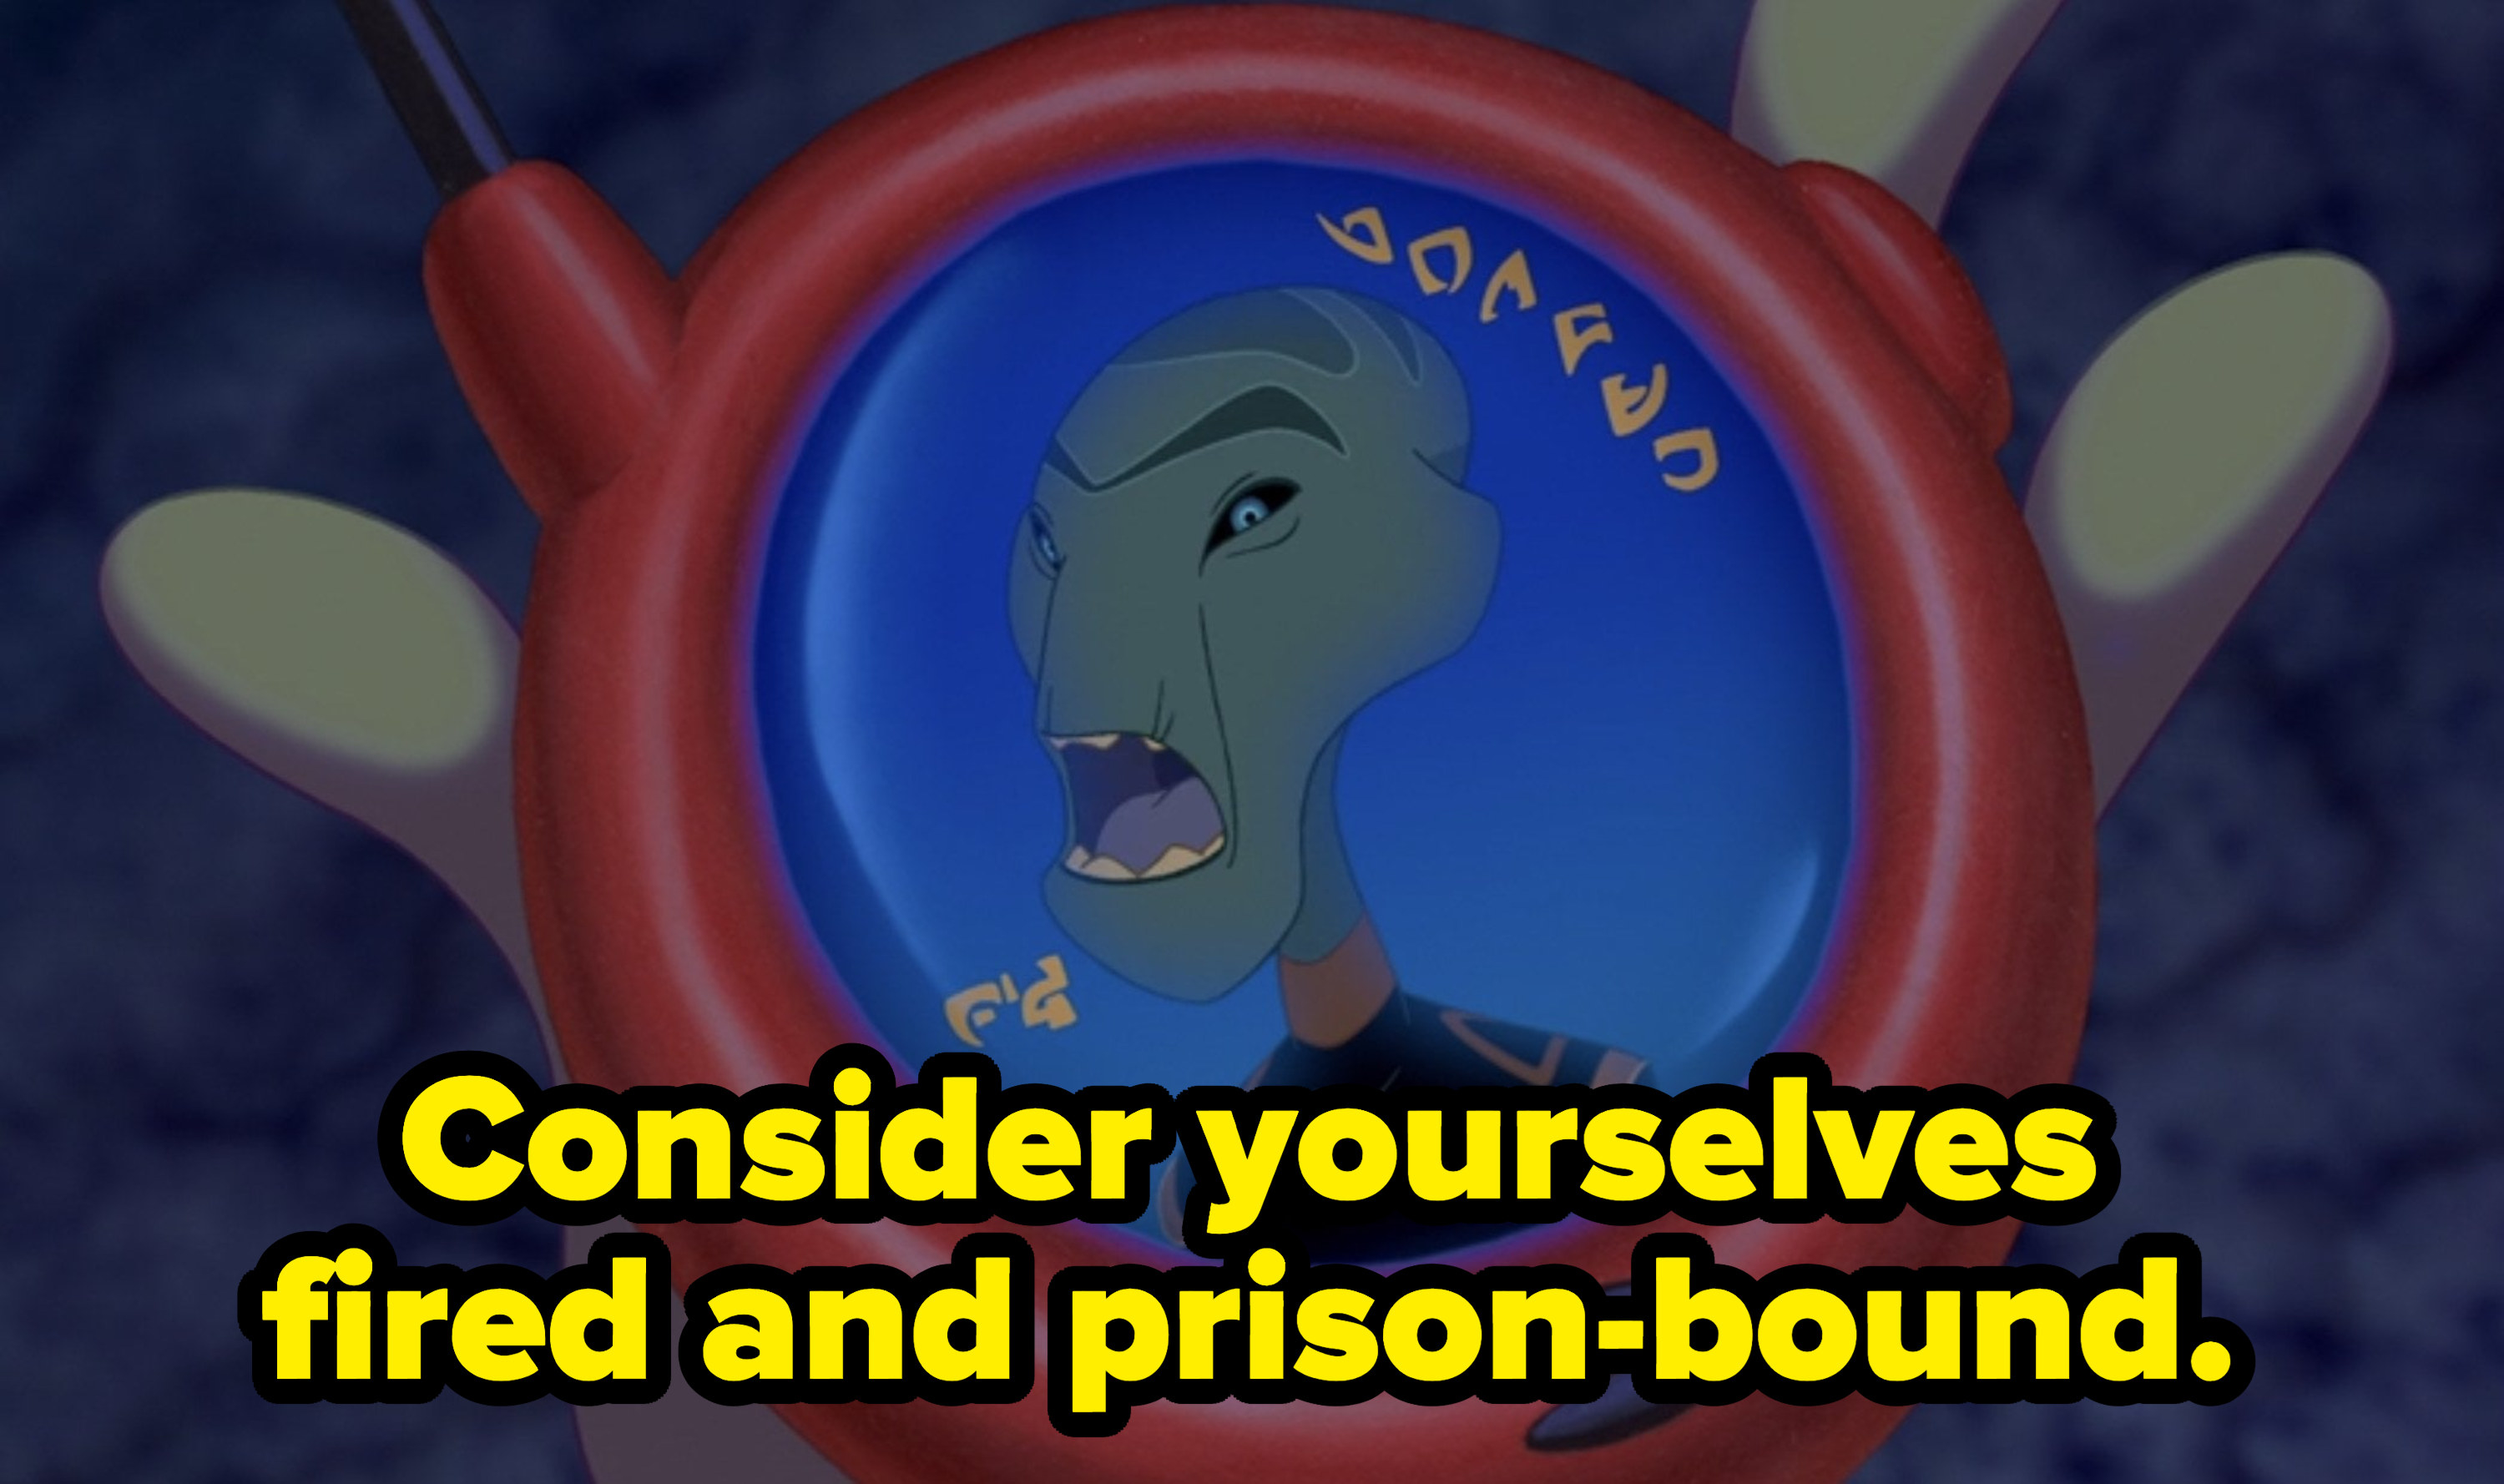 Alien saying Consider yourselves fired and prison-bound.